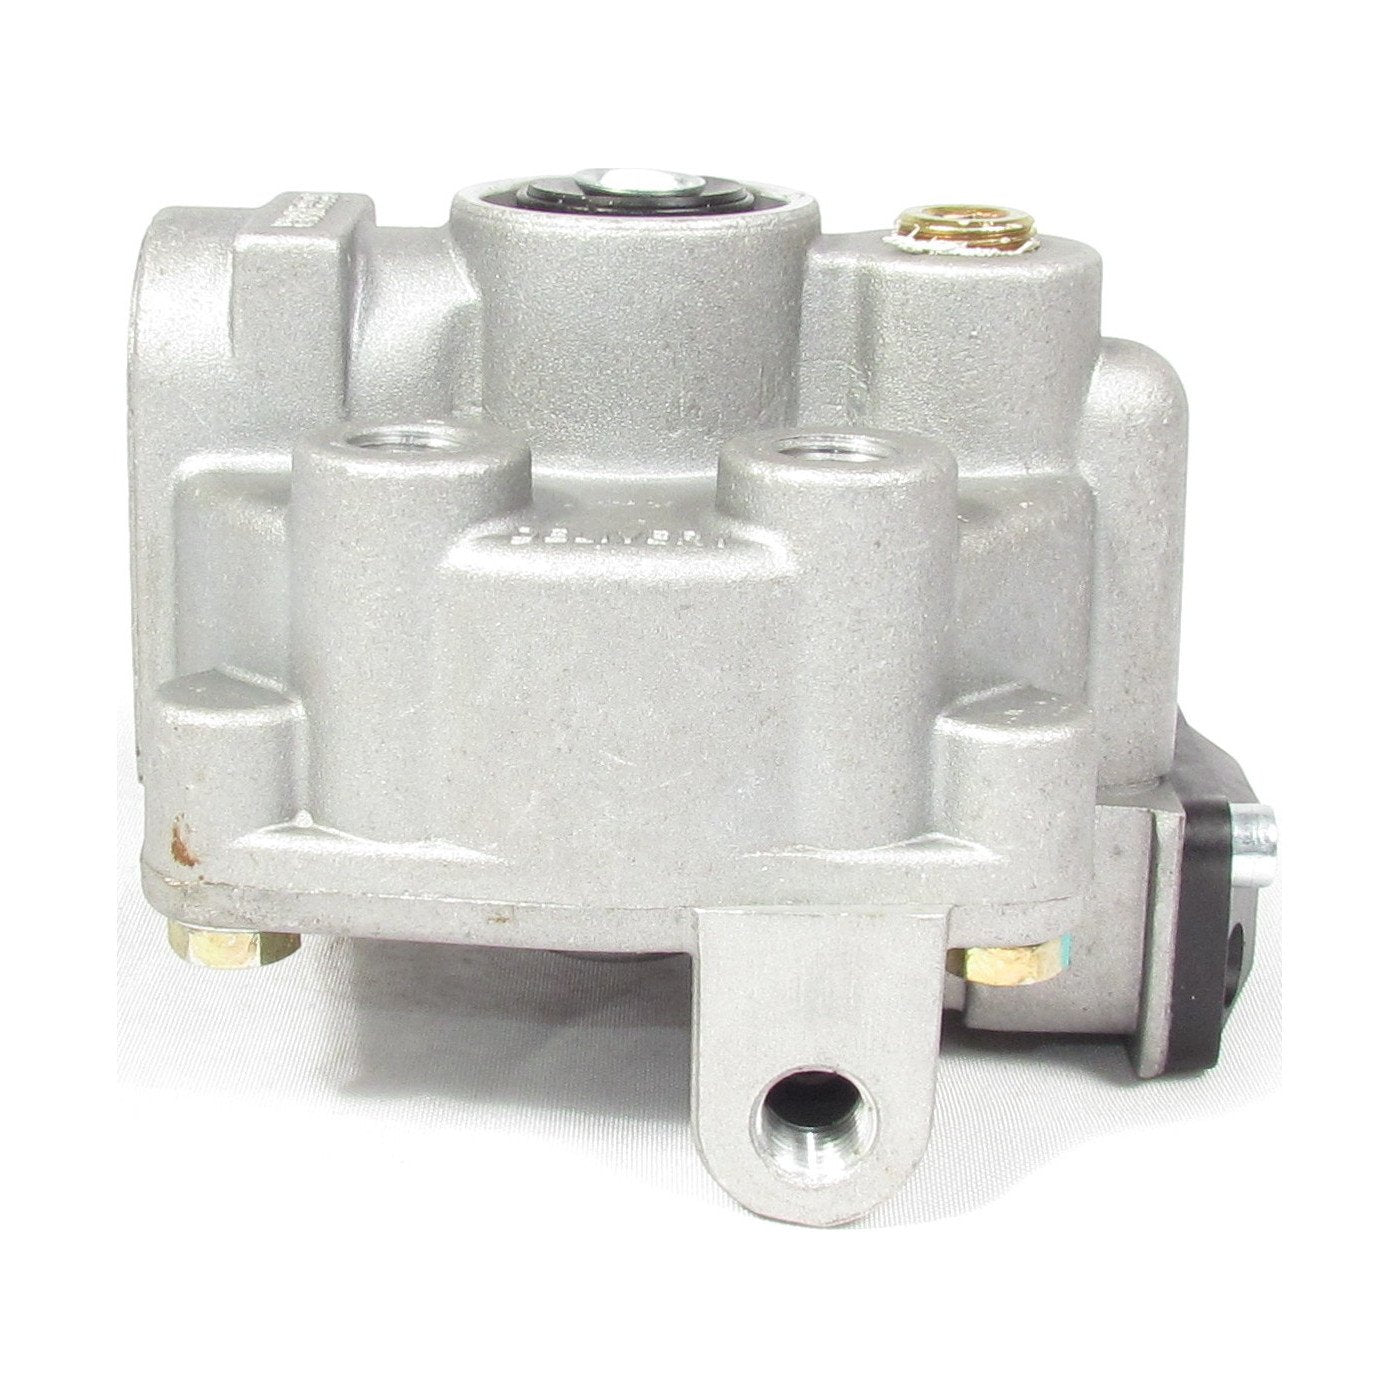 F224708 | EMERGENCY RELAY VALVE | Replace KN30300 | LEV-3635